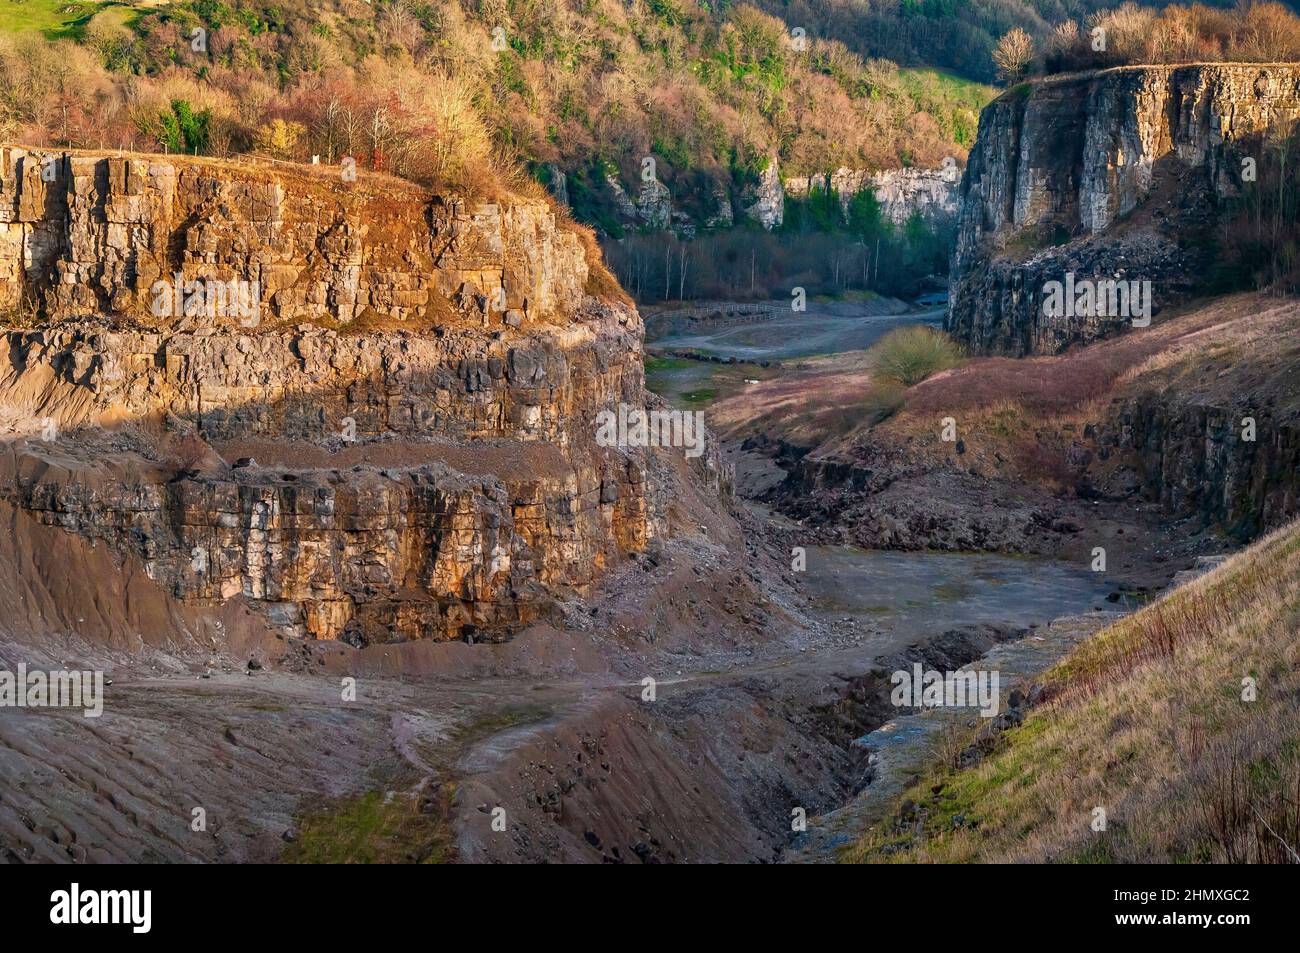 The dramatic restored remains of Goddard's limestone quarry, in bright winter sunshine, at Stoney Middleton, Derbyshire. Stock Photo